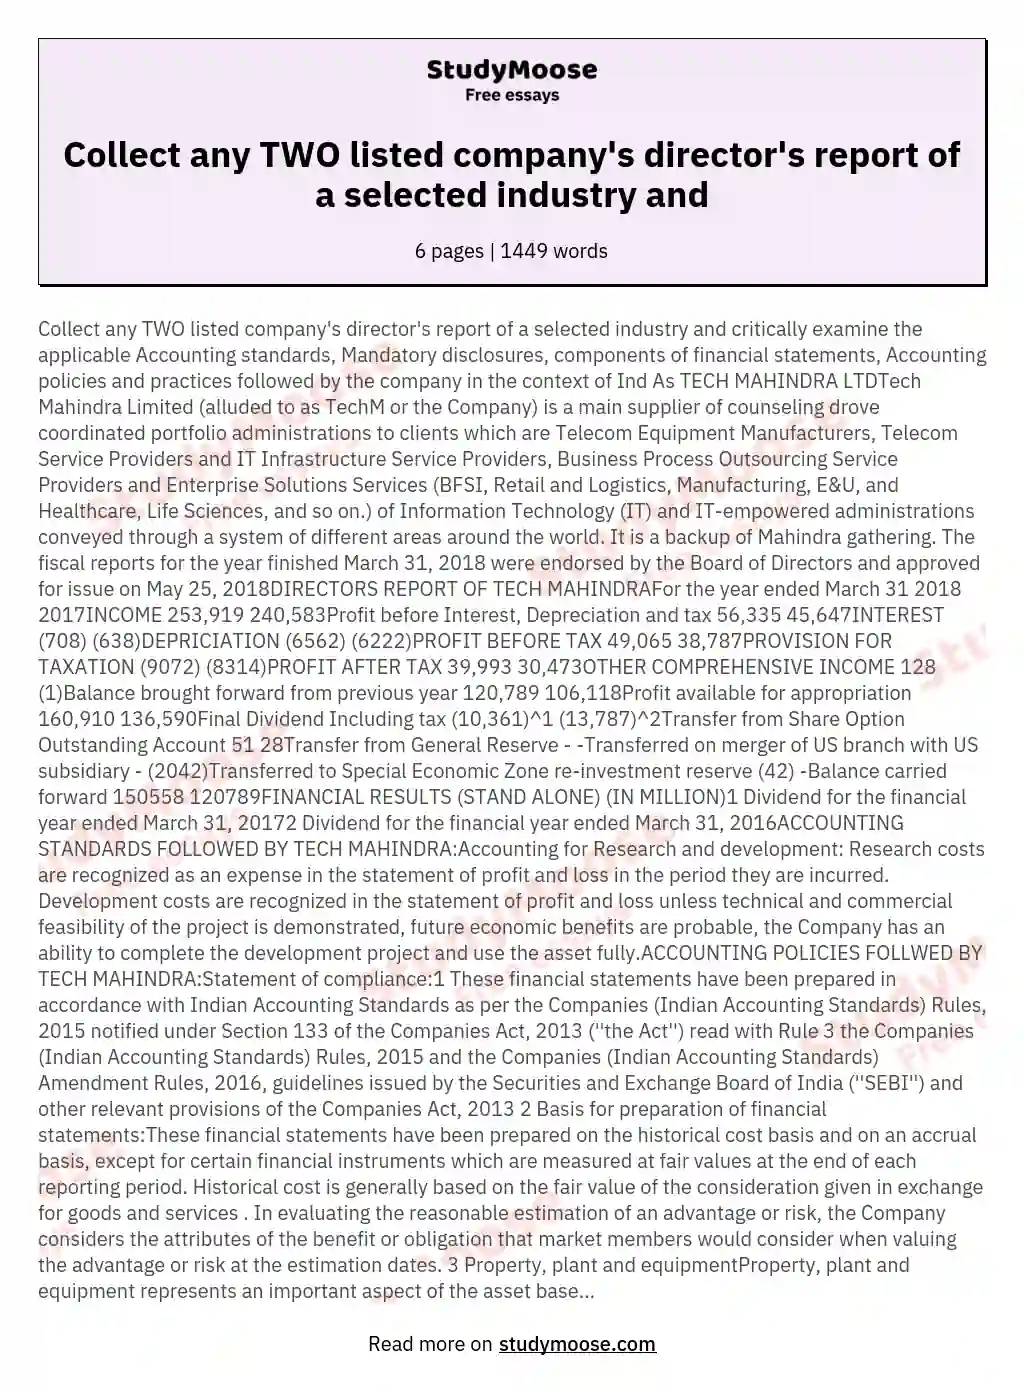 Collect any TWO listed company's director's report of a selected industry and